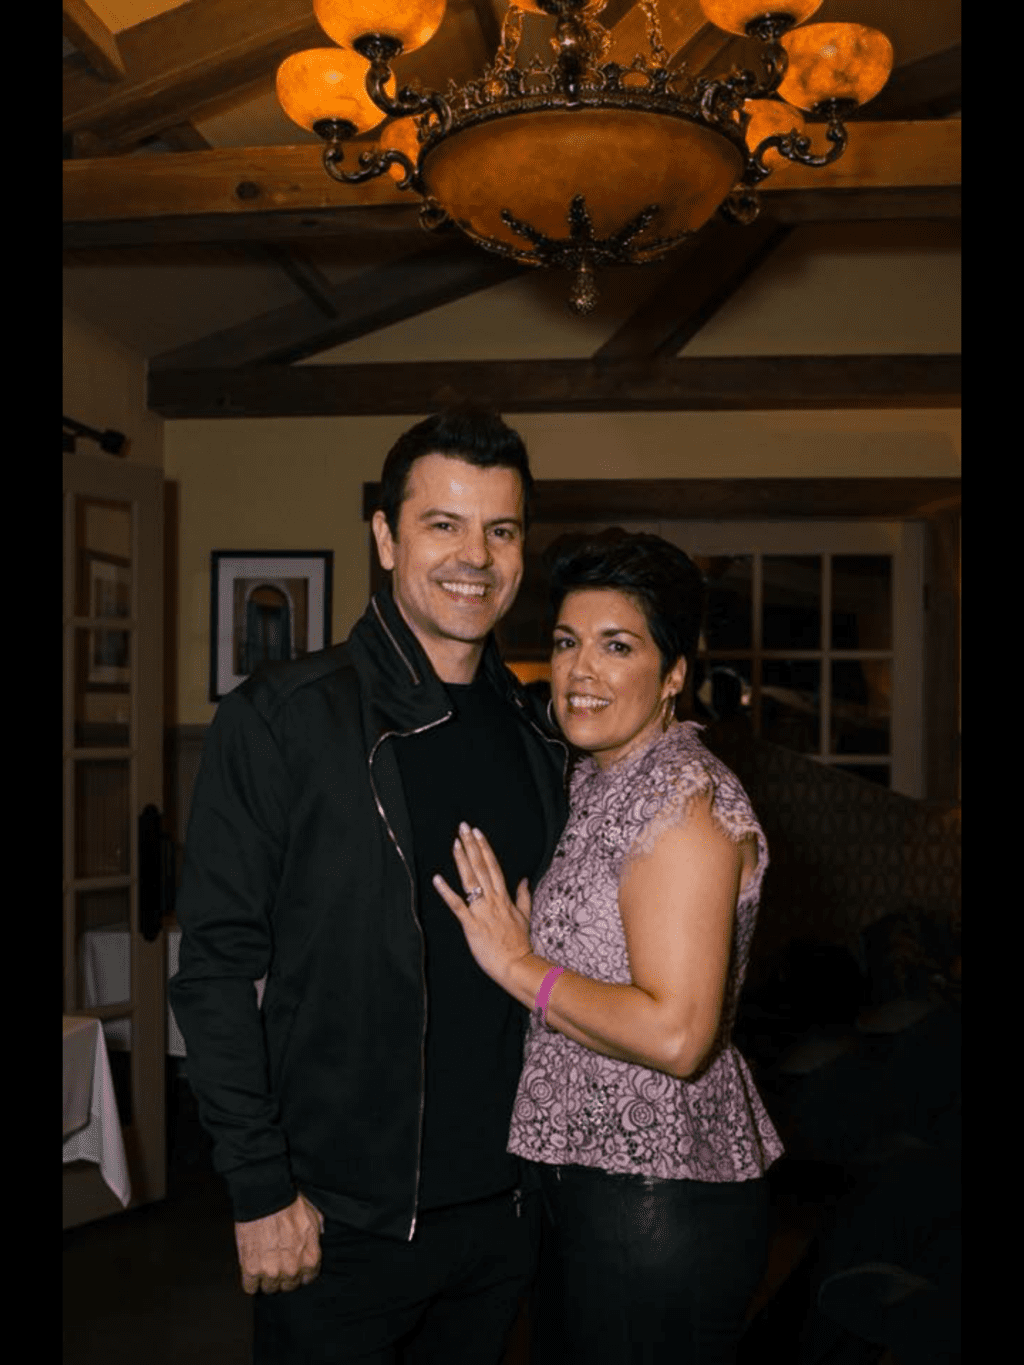 Jordan Knight Then & Now Through the Years A Picture Timeline